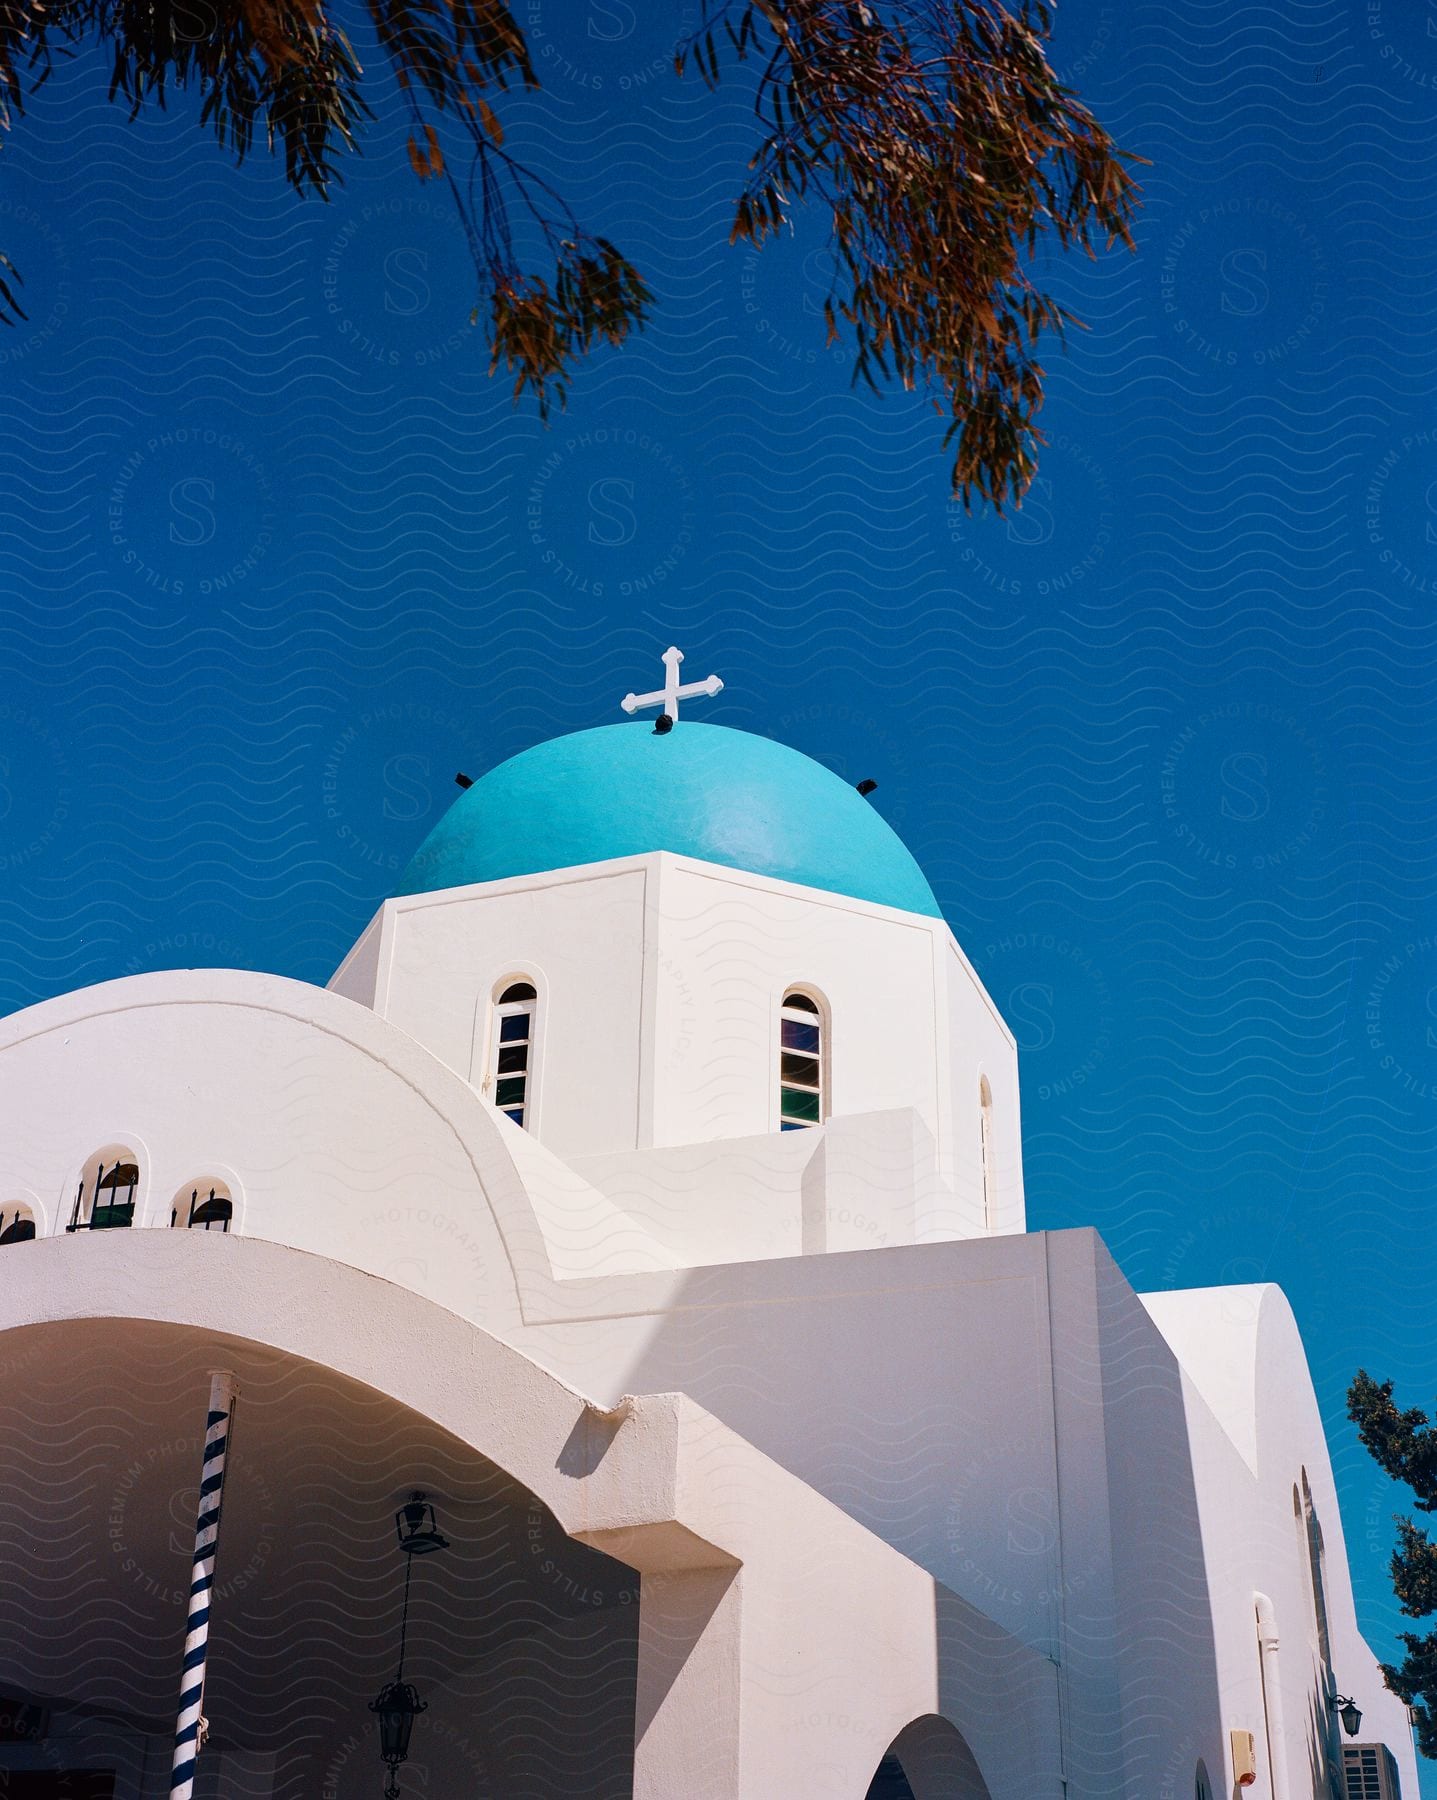 Church with traditional architecture of the Greek islands with whitewashed walls and a blue dome with a cross and under a clear sky.